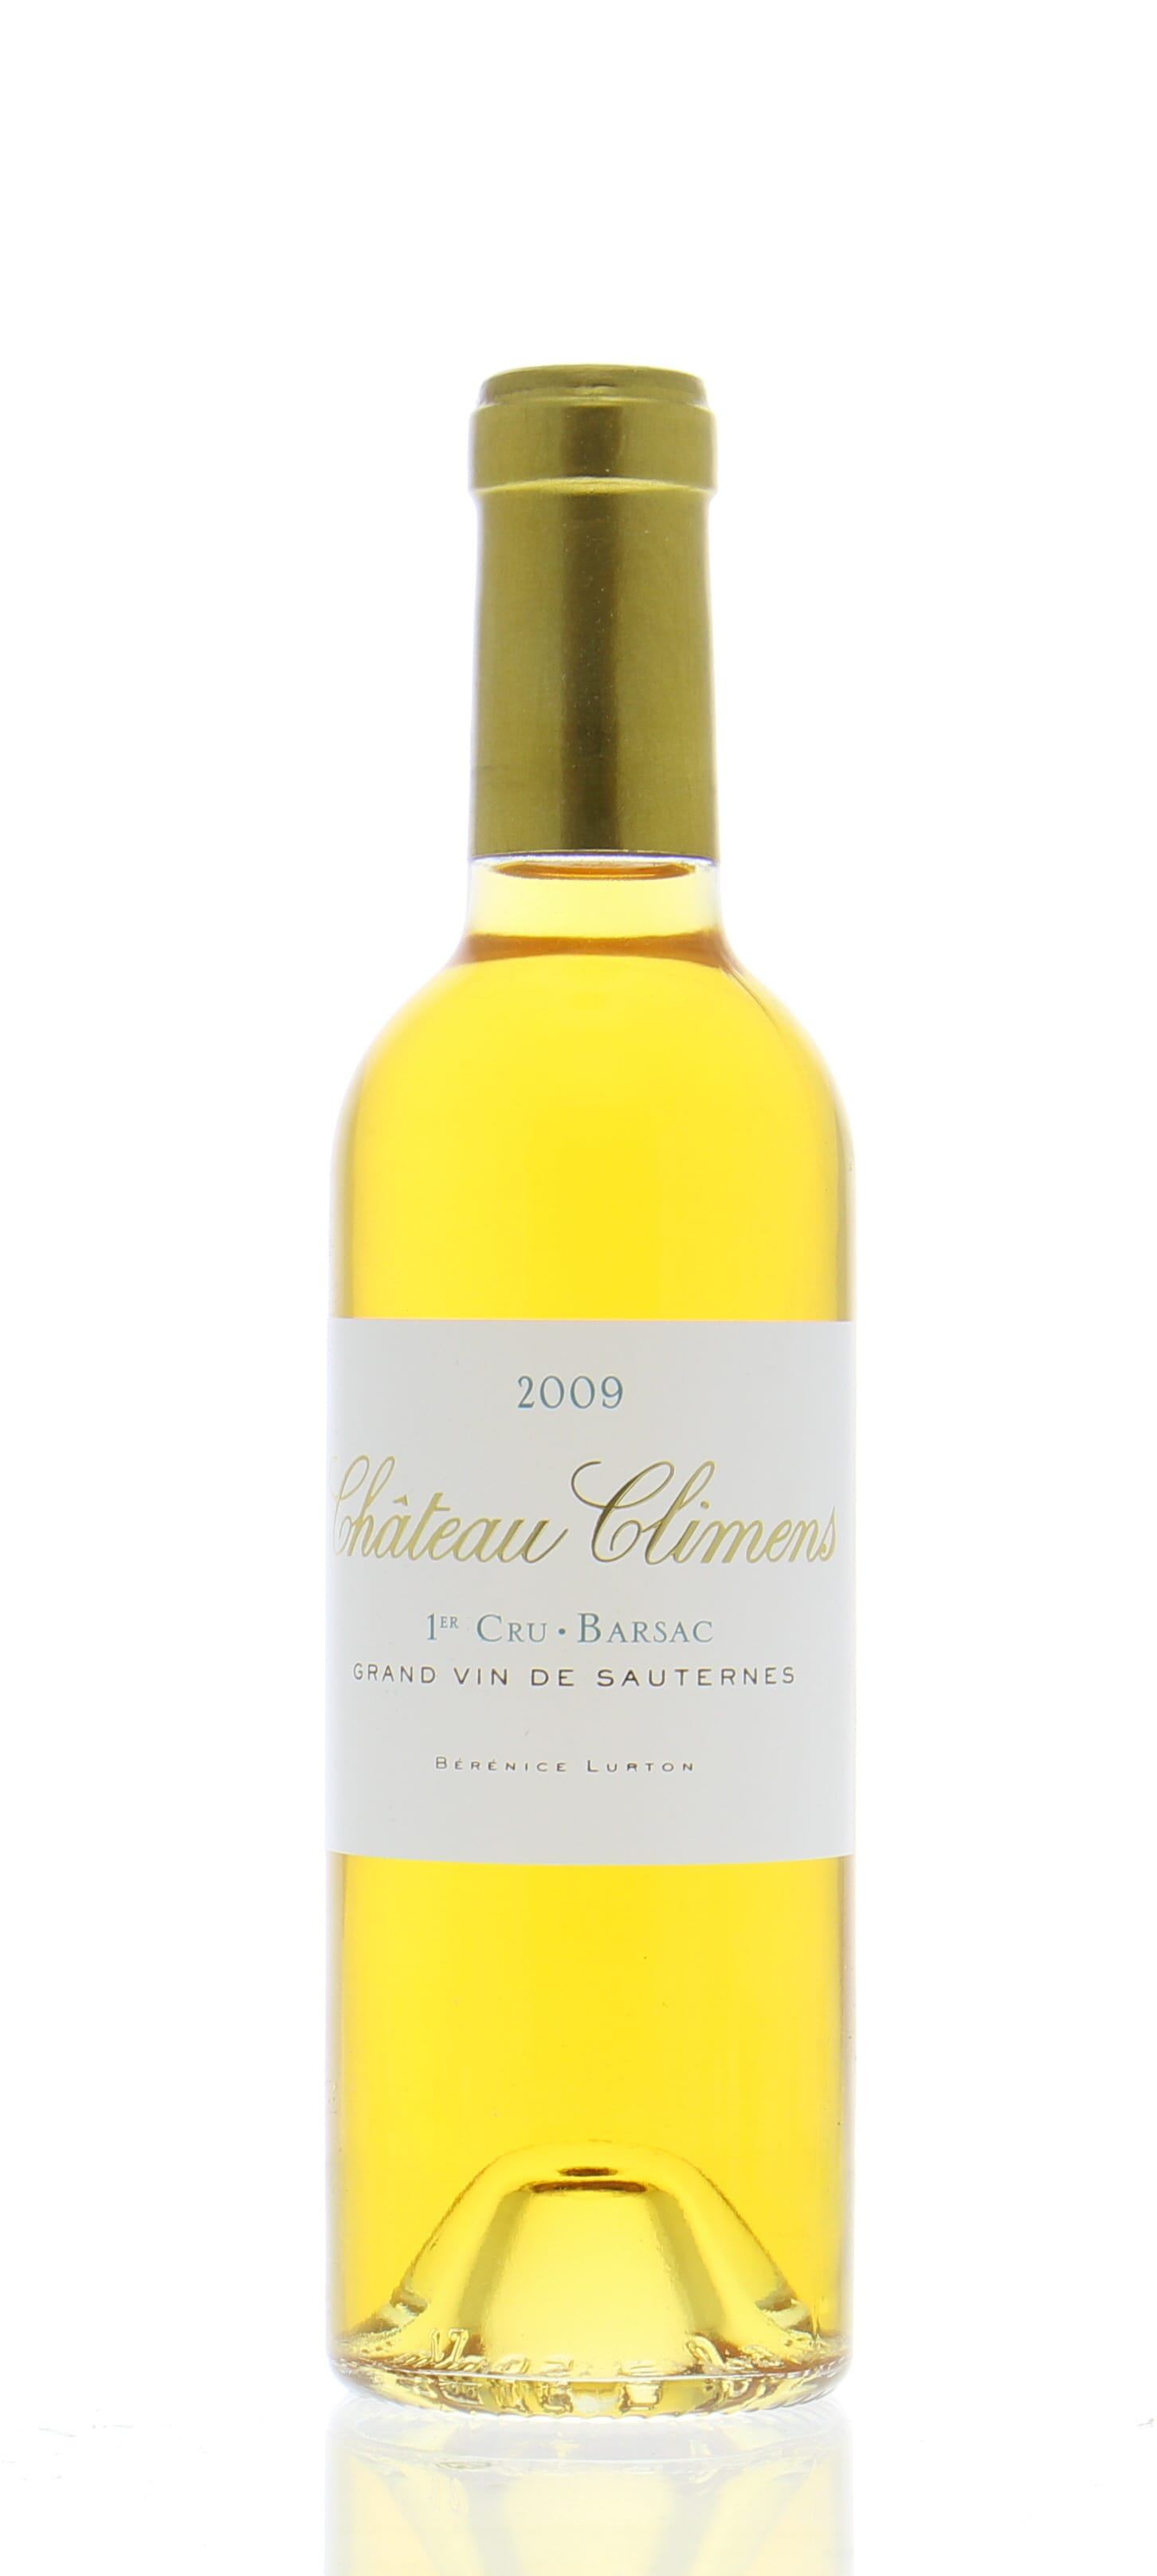 Chateau Climens - Chateau Climens 2009 From Original Wooden Case